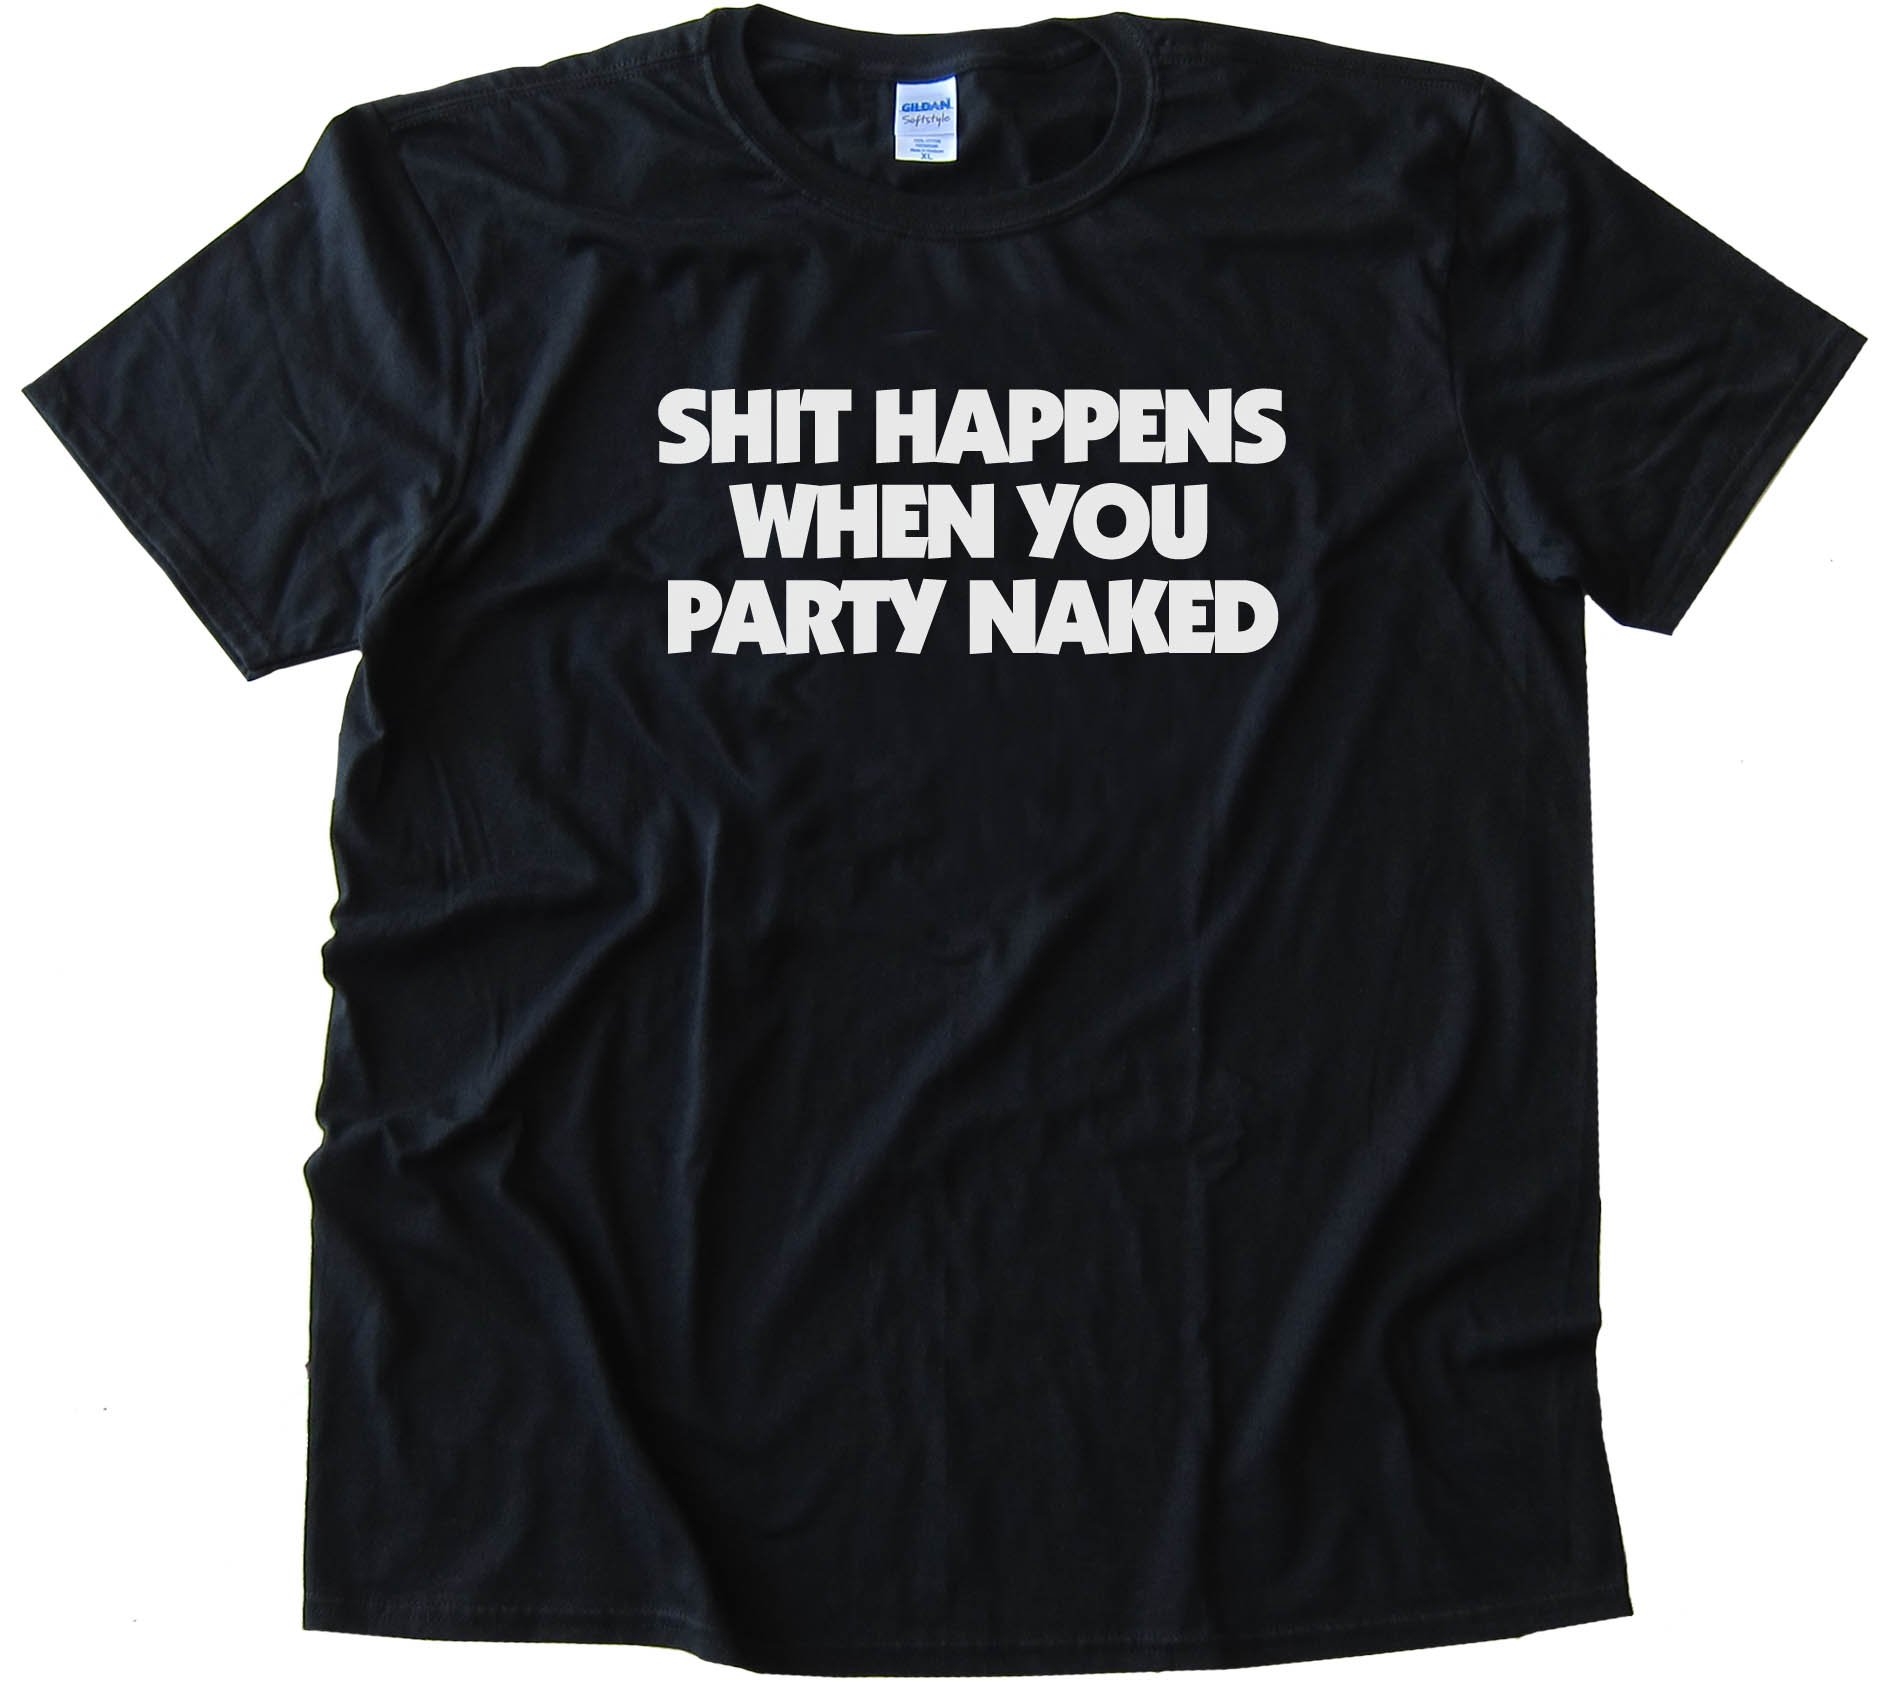 Shit Happens When You Party Naked - Tee Shirt